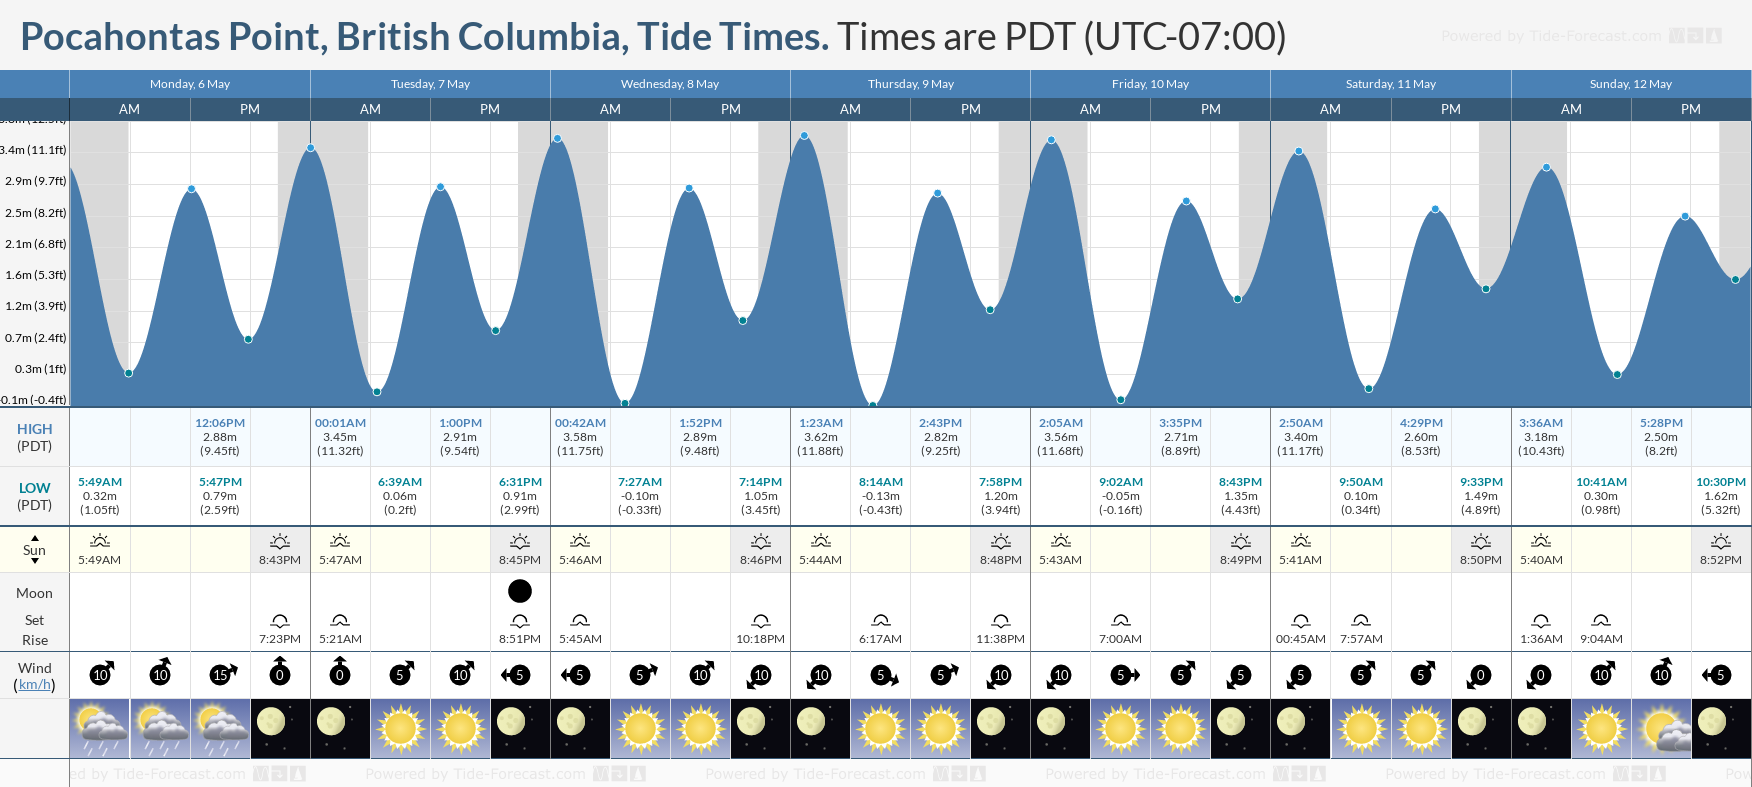 Pocahontas Point, British Columbia Tide Chart including high and low tide tide times for the next 7 days